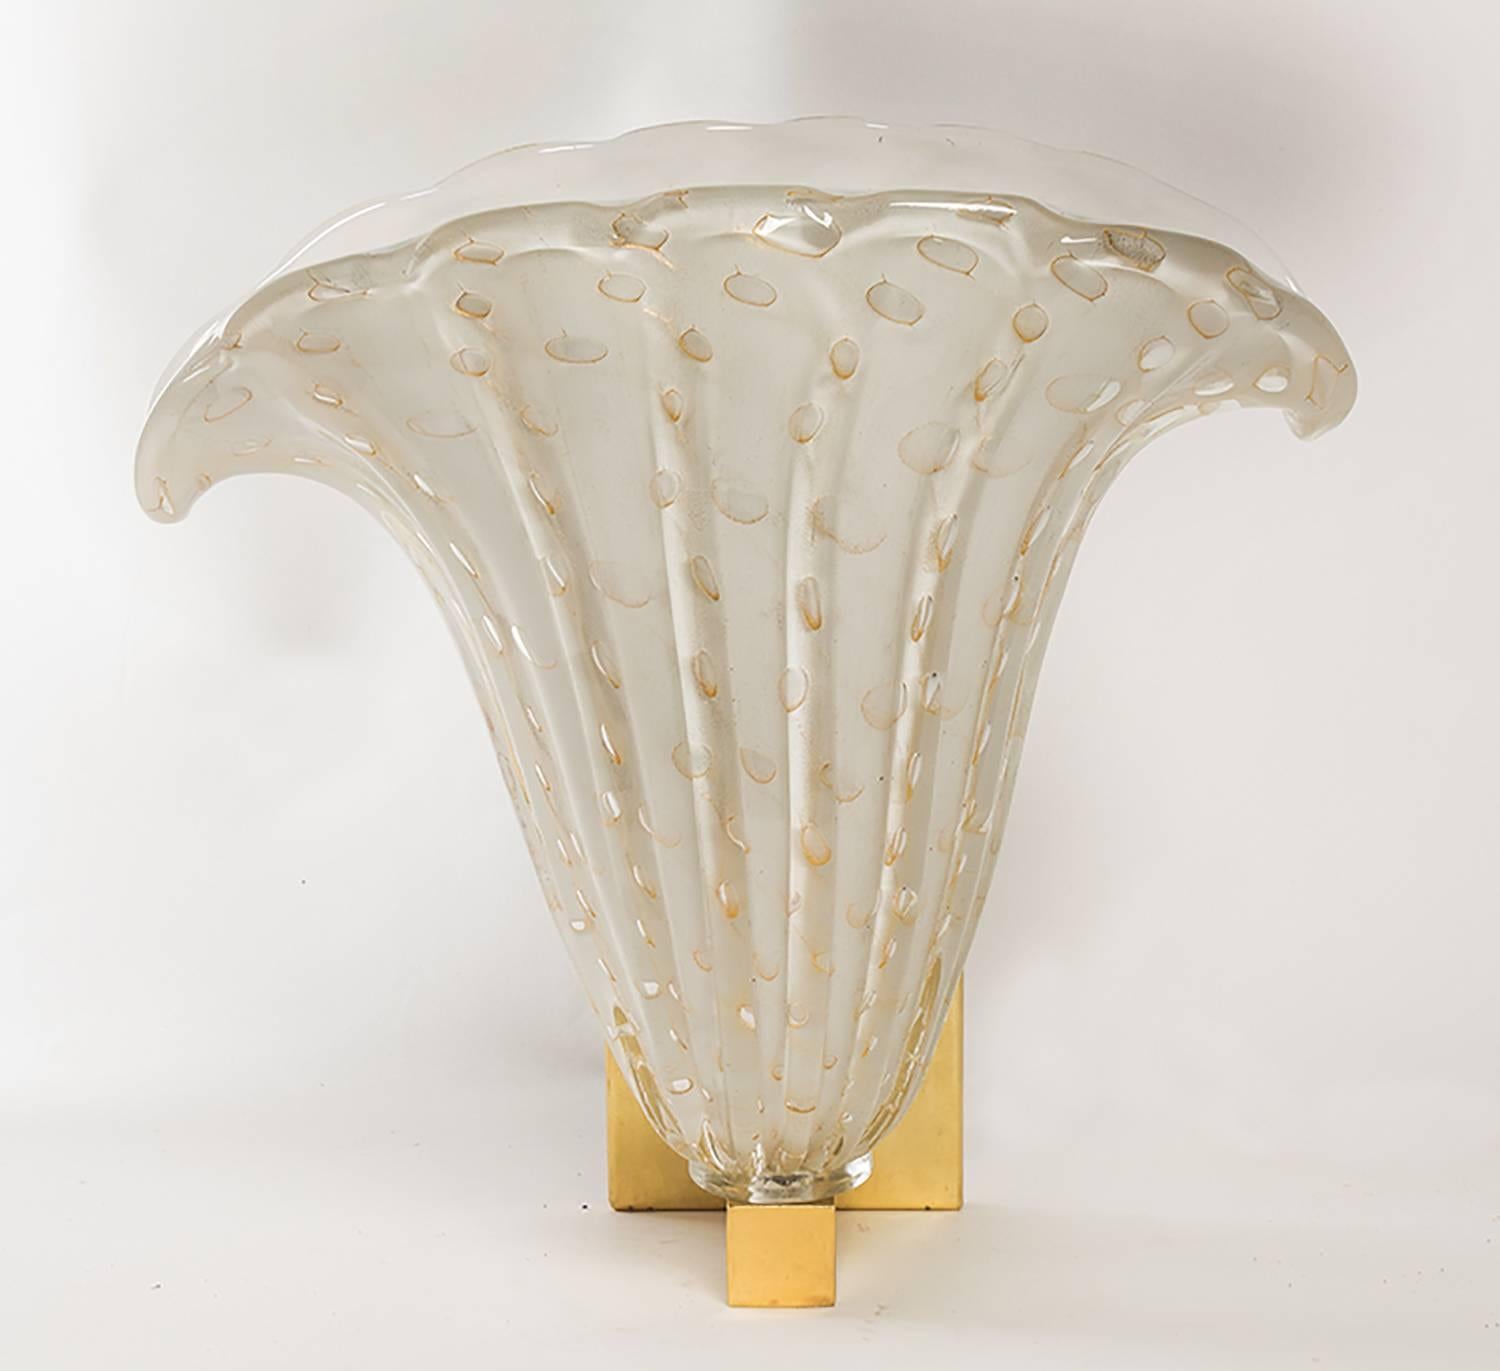 Murano glass tulip-shaped wall sconces.